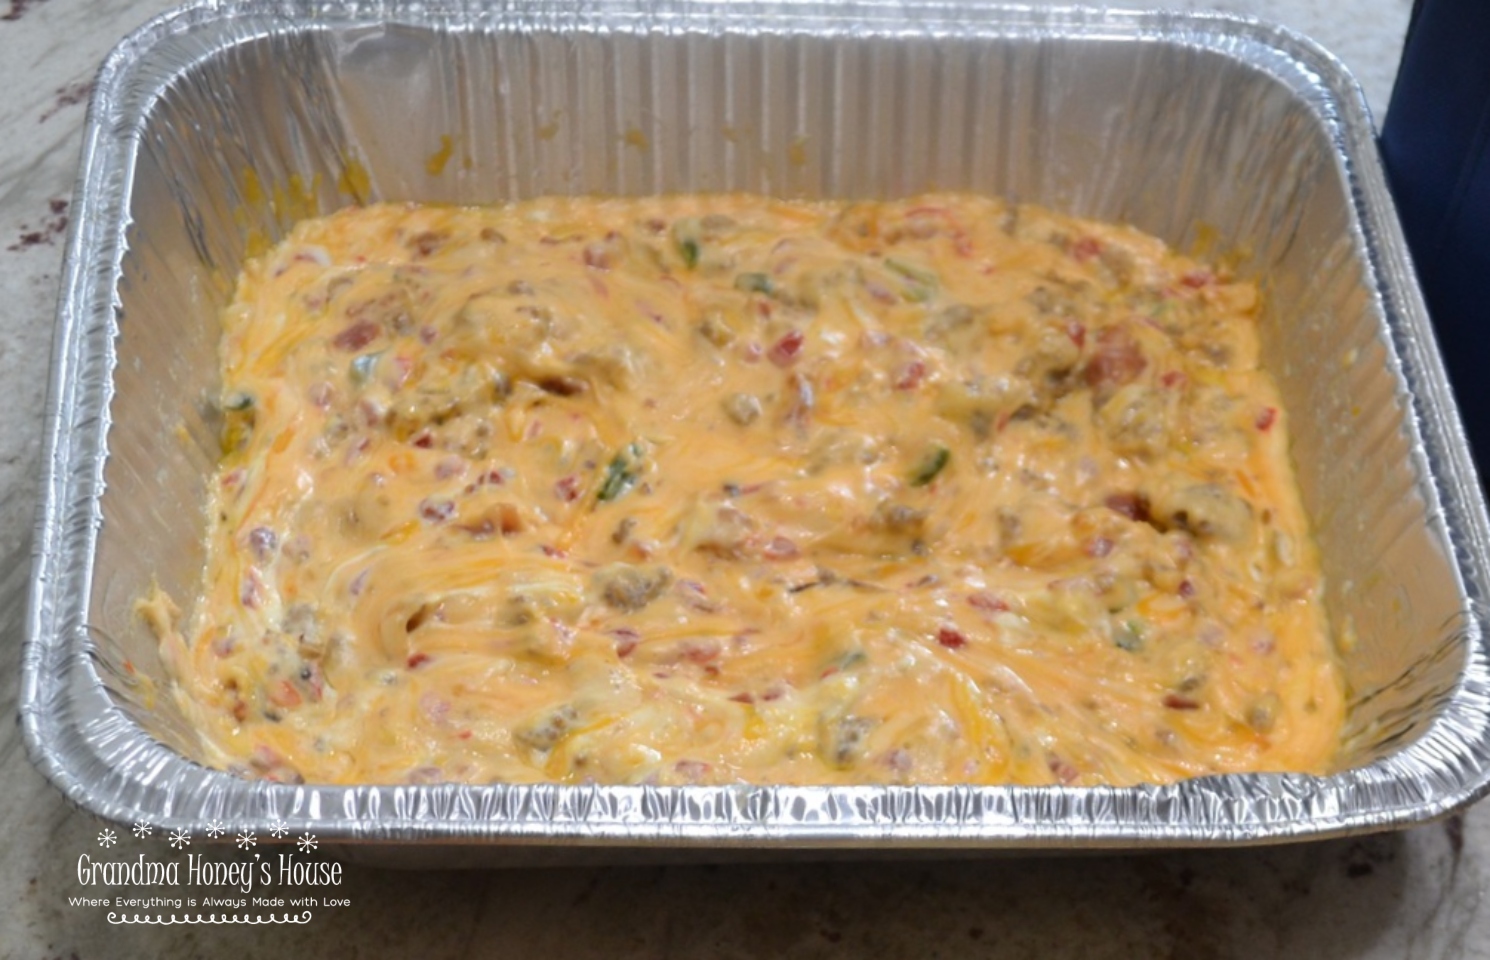 Smoky Sausage Pimento Cheese Dip is prepared on the grill and perfect for tailgates.